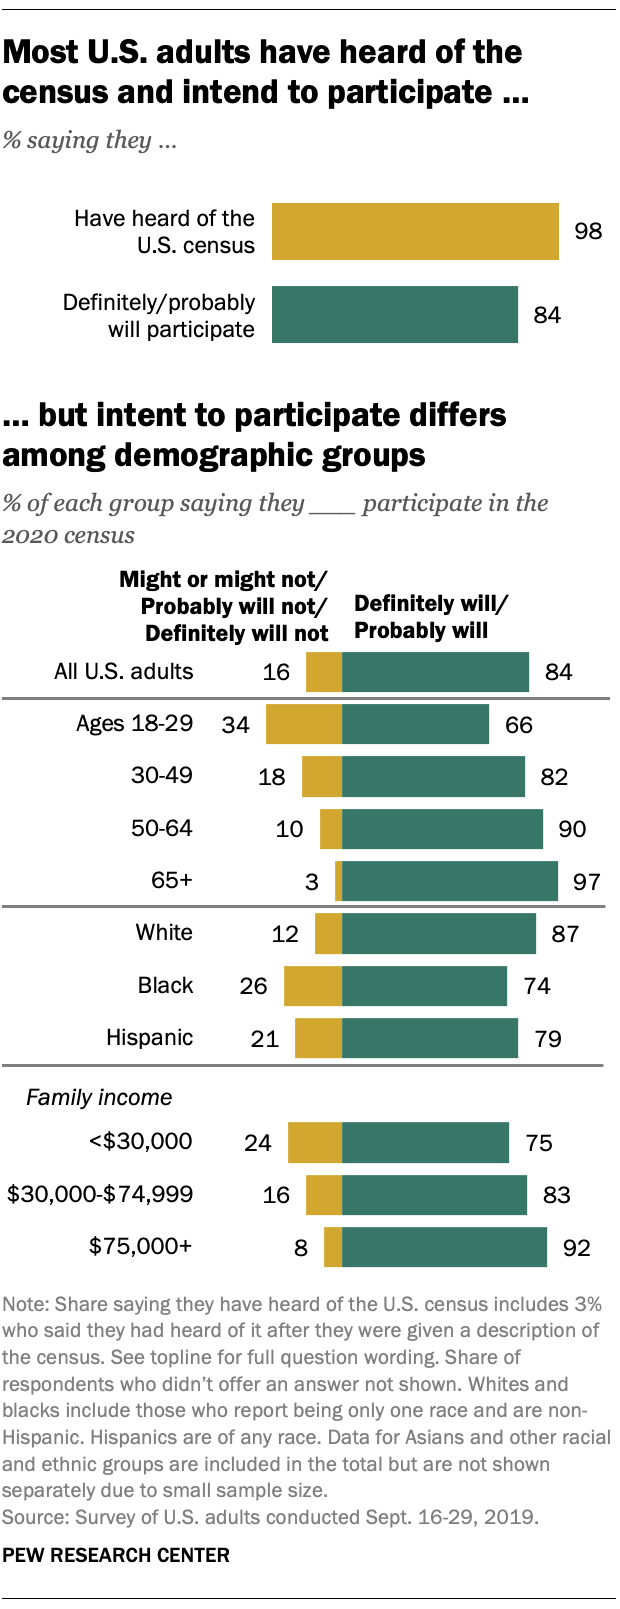 Most U.S. adults have heard of the census and intend to participate ... but intent to participate differs among demographic groups